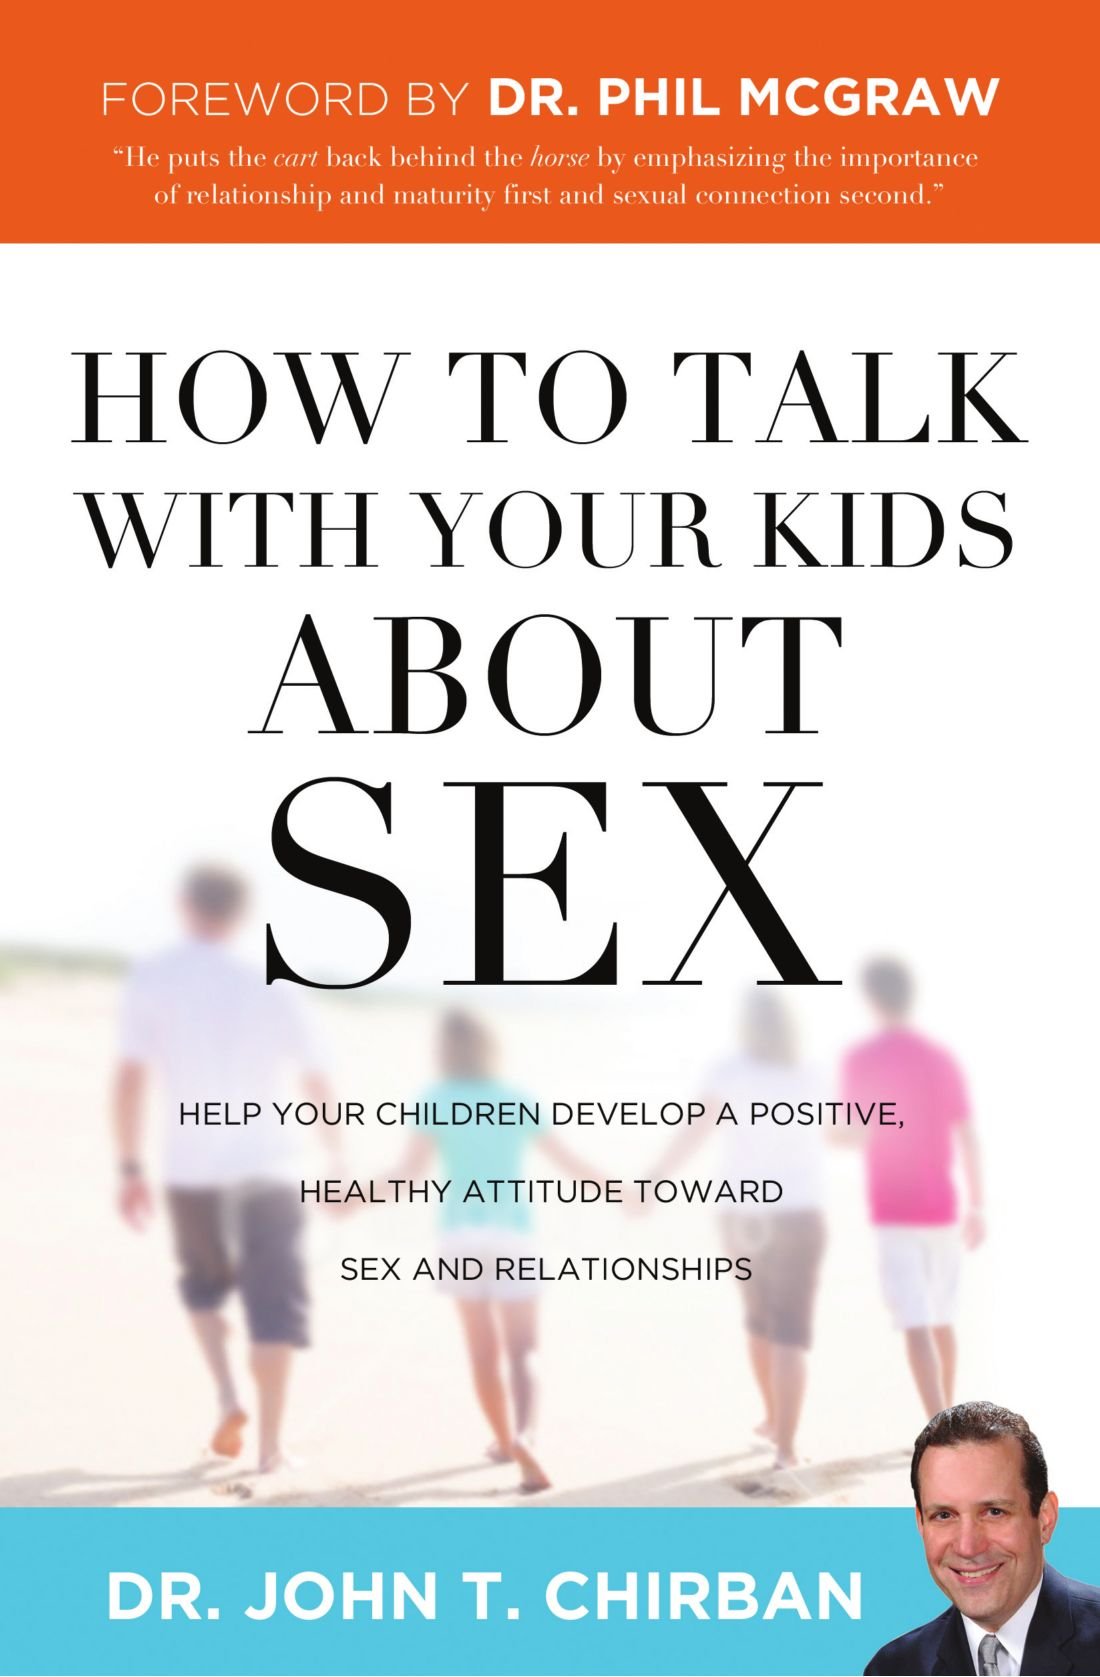 How to Talk with Your Kids About Sex Summary